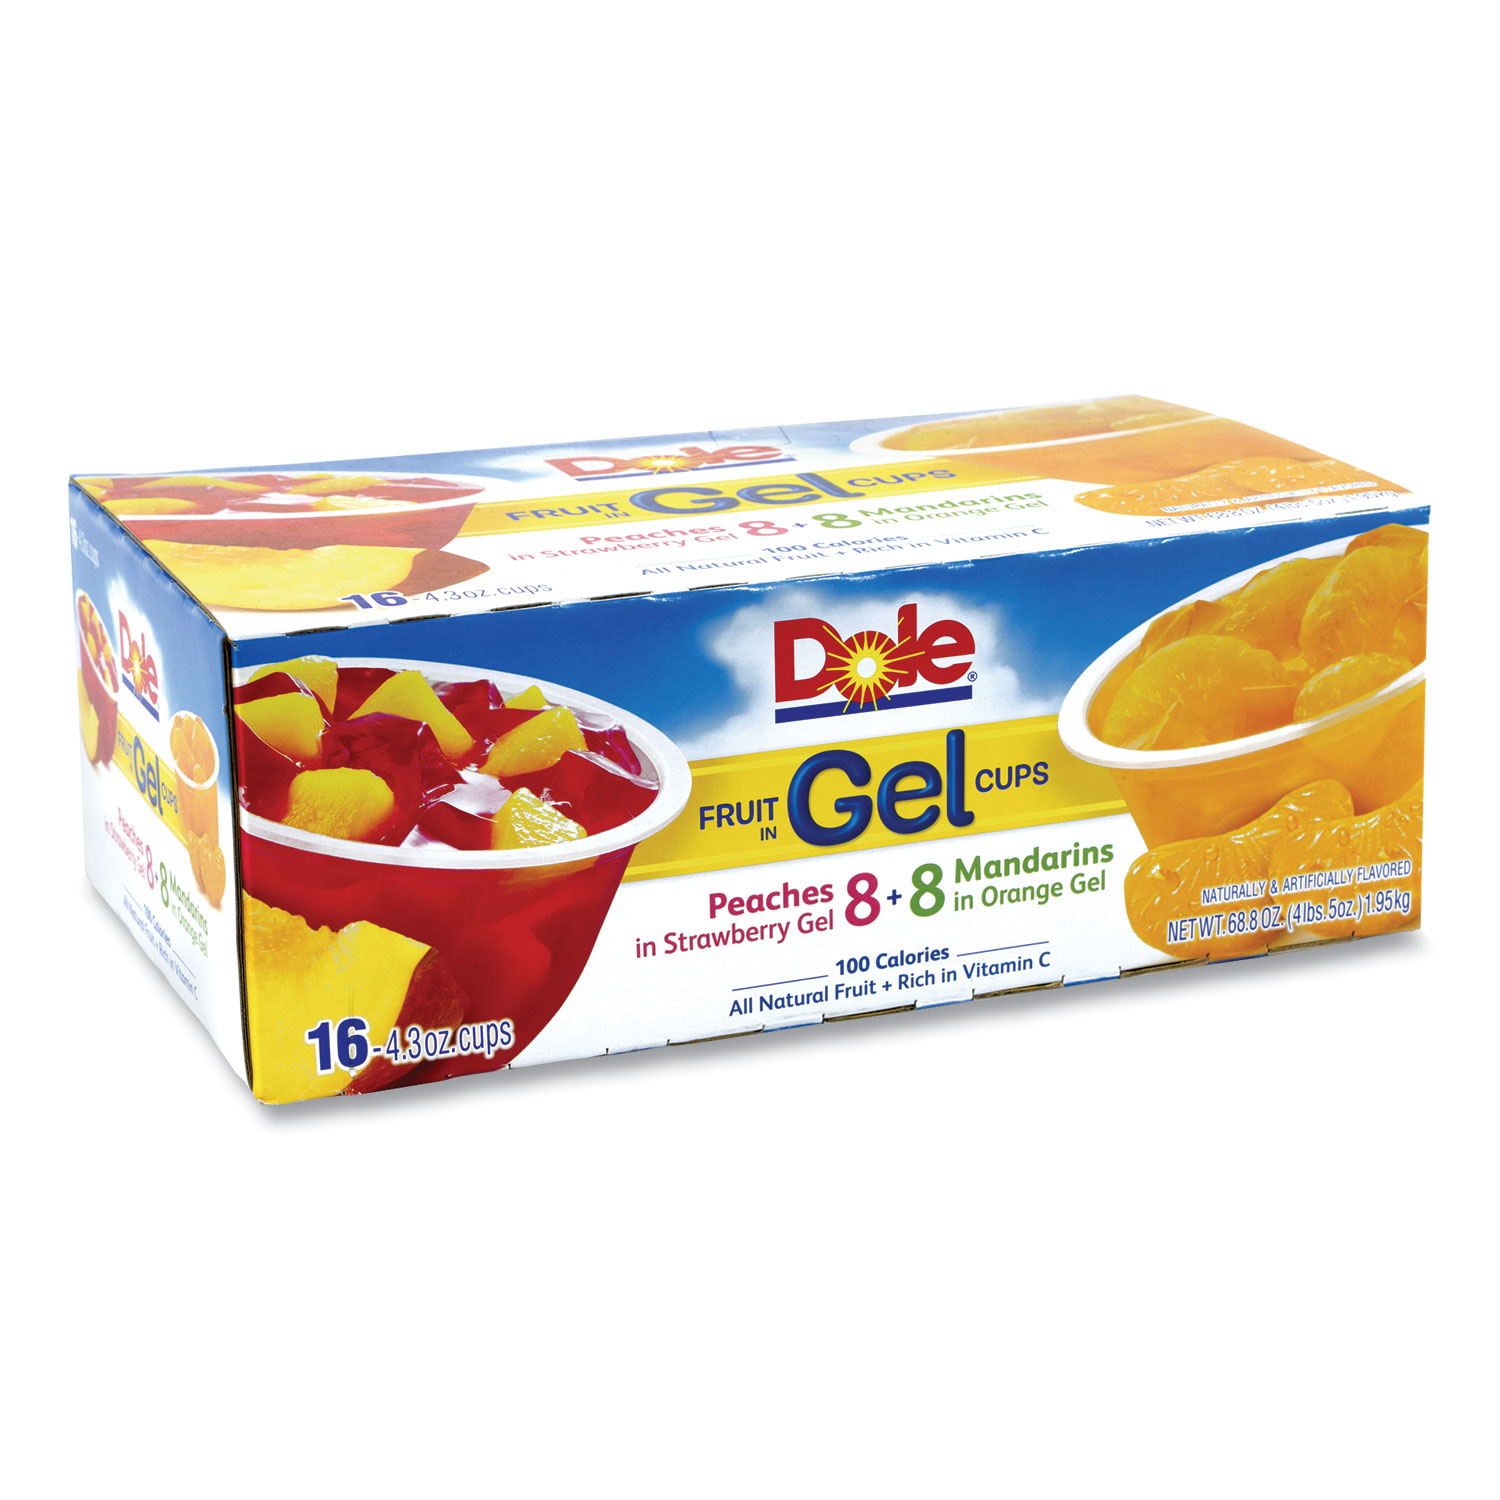 Dole® Fruit in Gel Cups, Mandarins/Orange, Peaches/Strawberry, 4.3 oz Cups, 16 Cups/Carton, Free Delivery in 1-4 Business Days